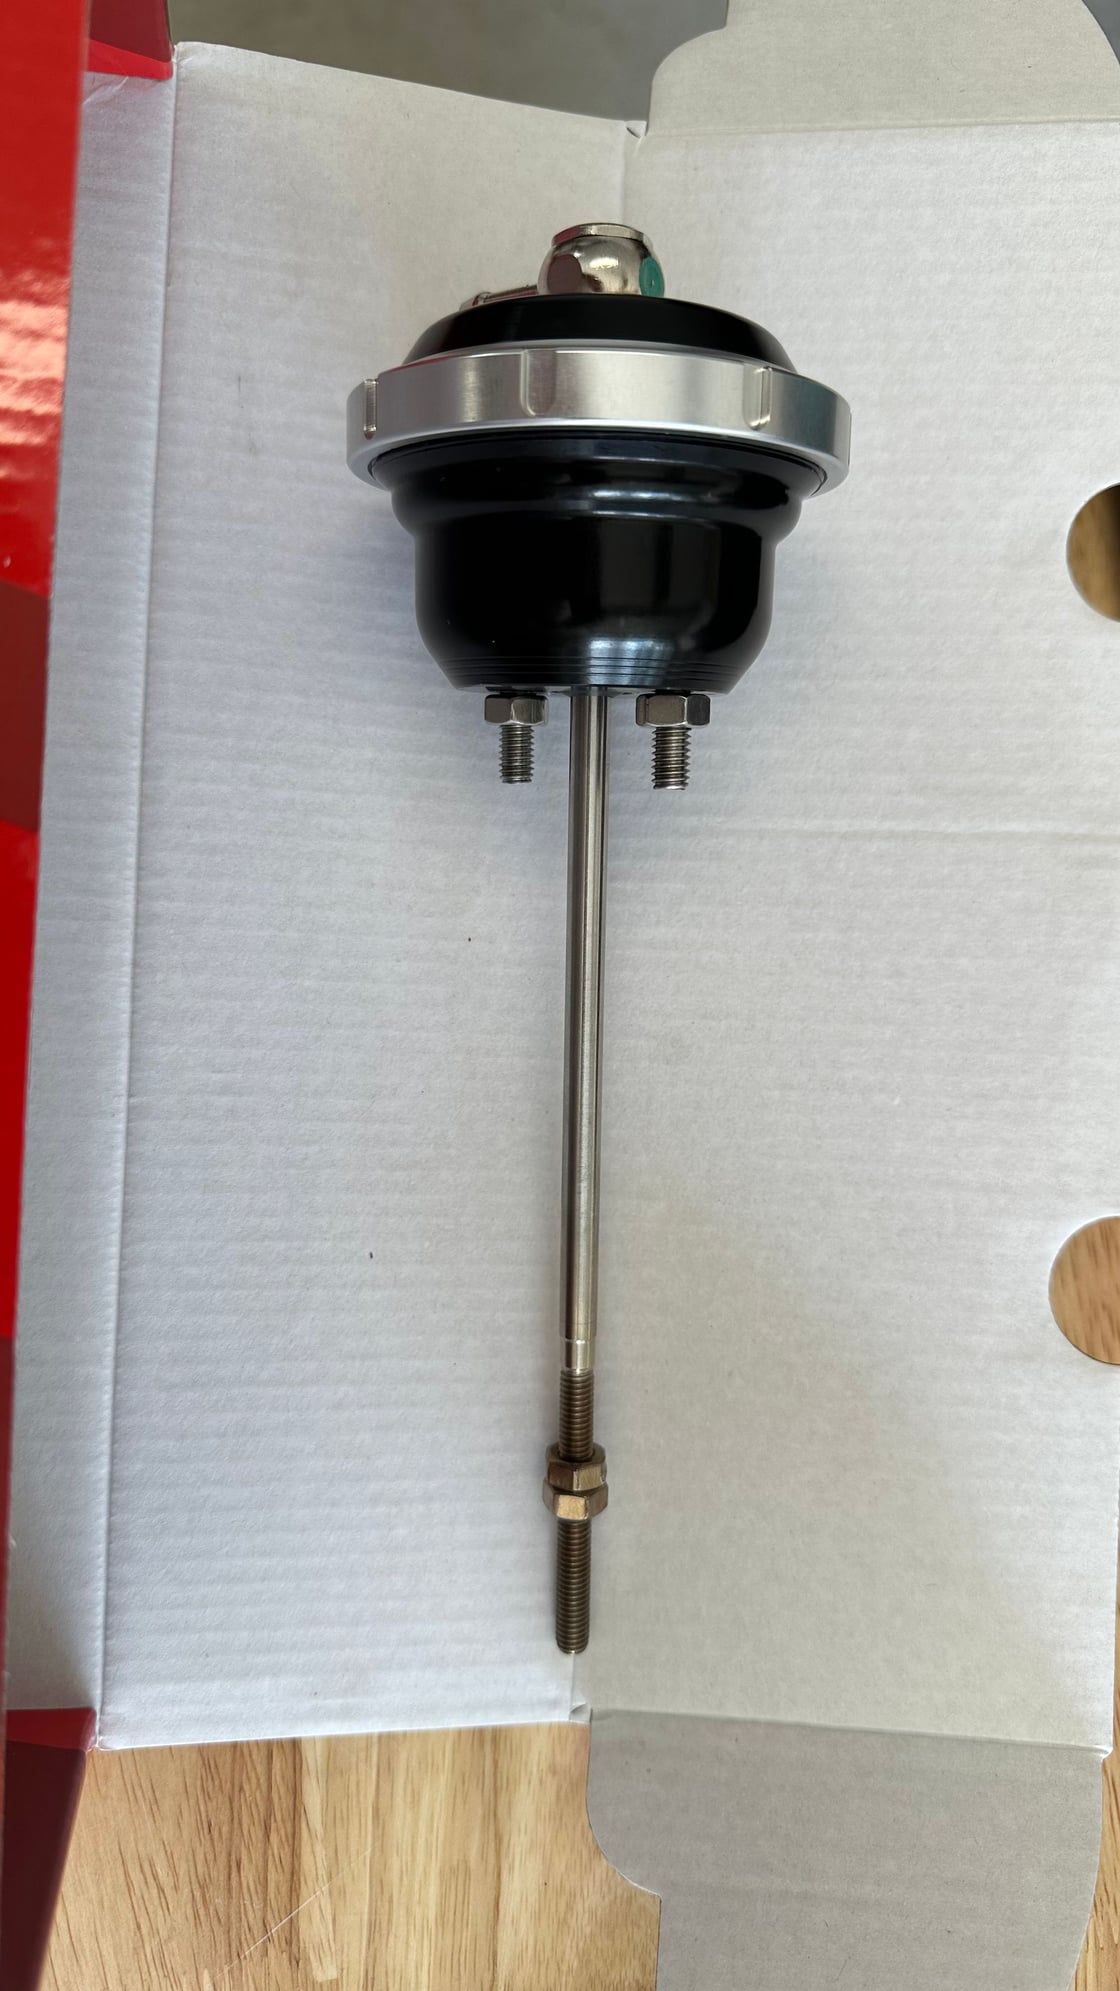 Miscellaneous - Turbosmart IWG 14psi   $140 Shipped - Used - 0  All Models - Melbourne, FL 32940, United States